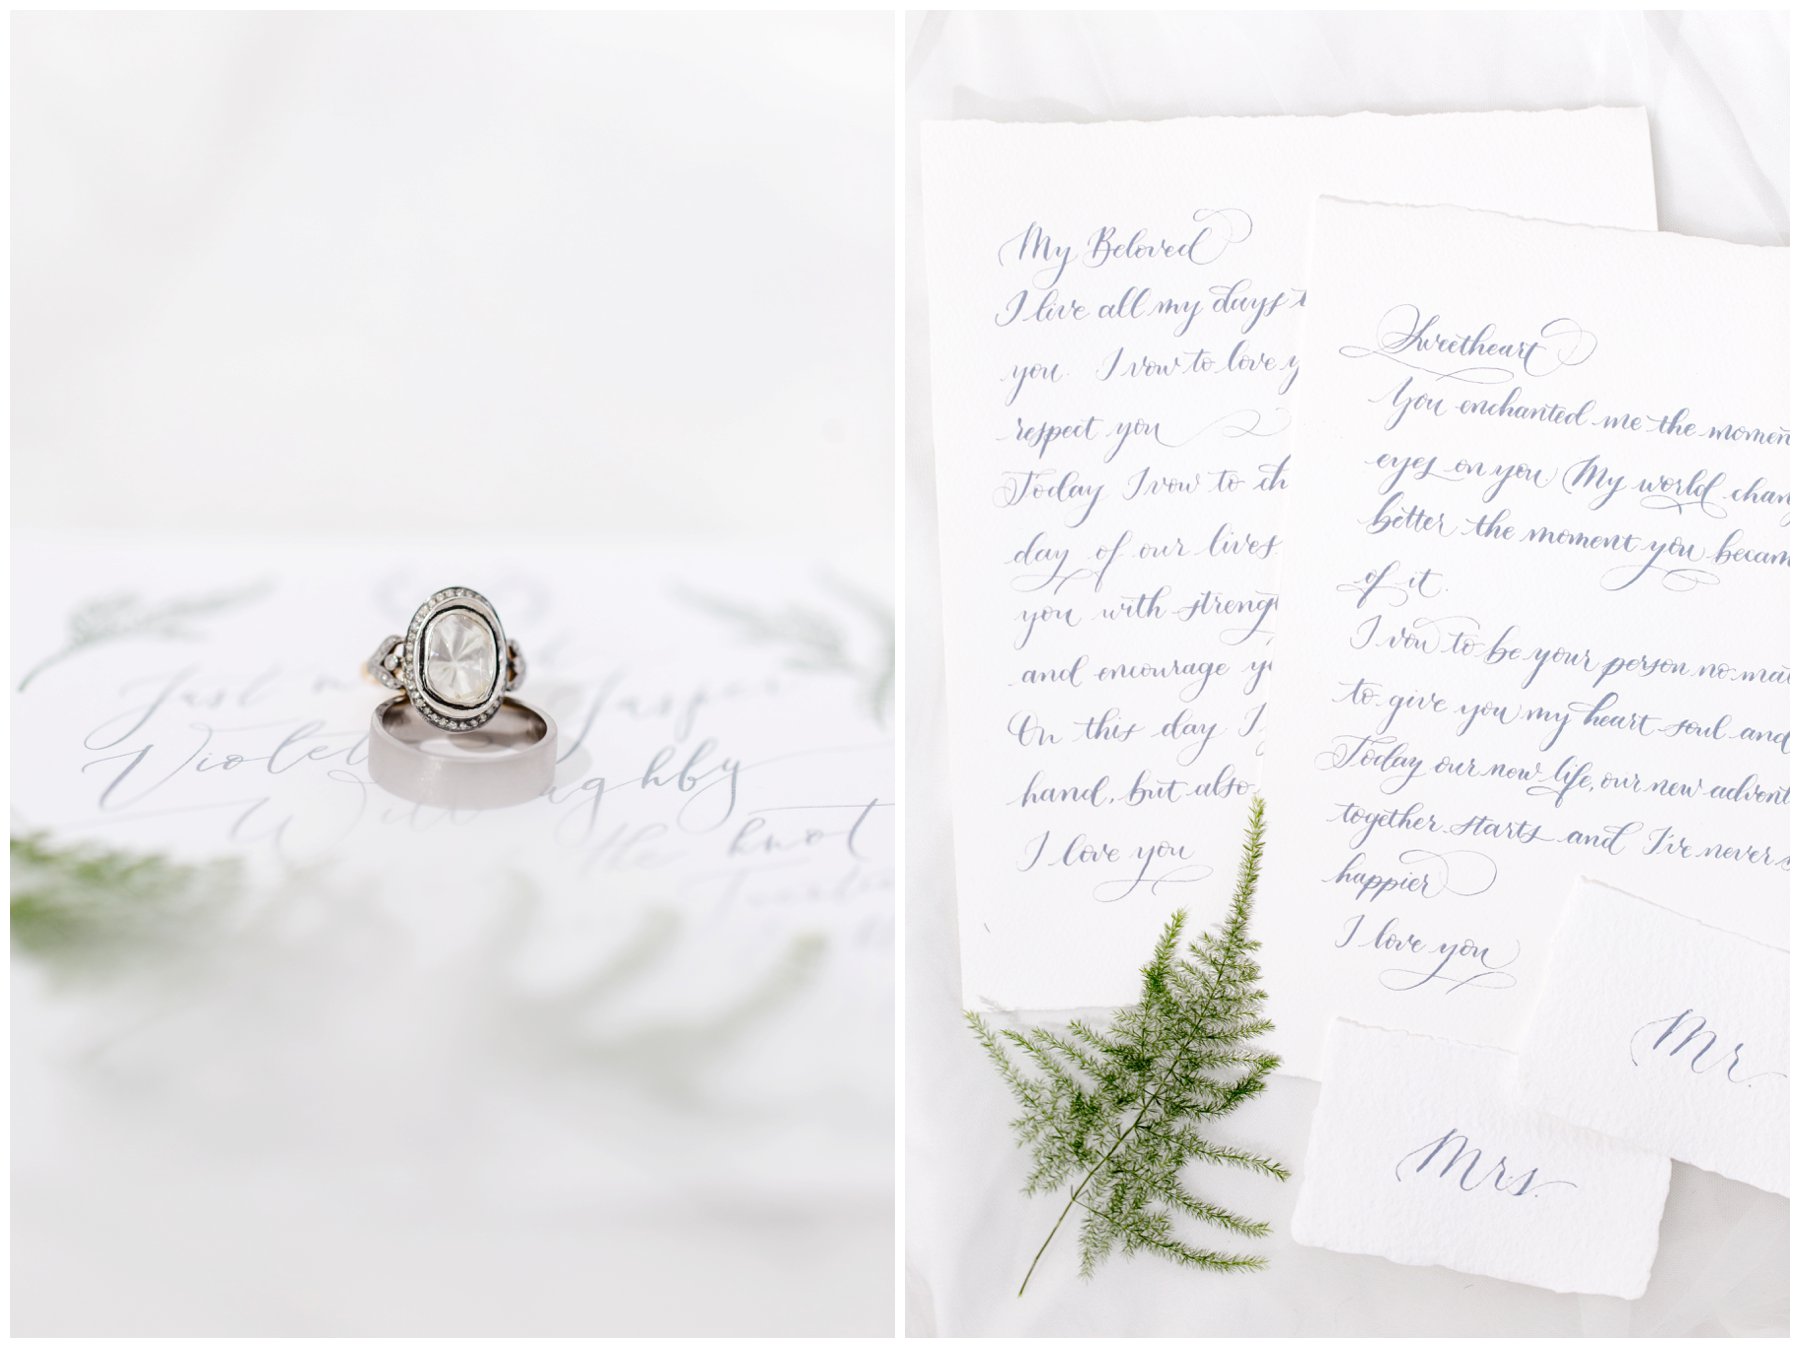 Le Belvedere Elopement Wakefield uncut diamond custom ring hand calligraphed vows and greenery